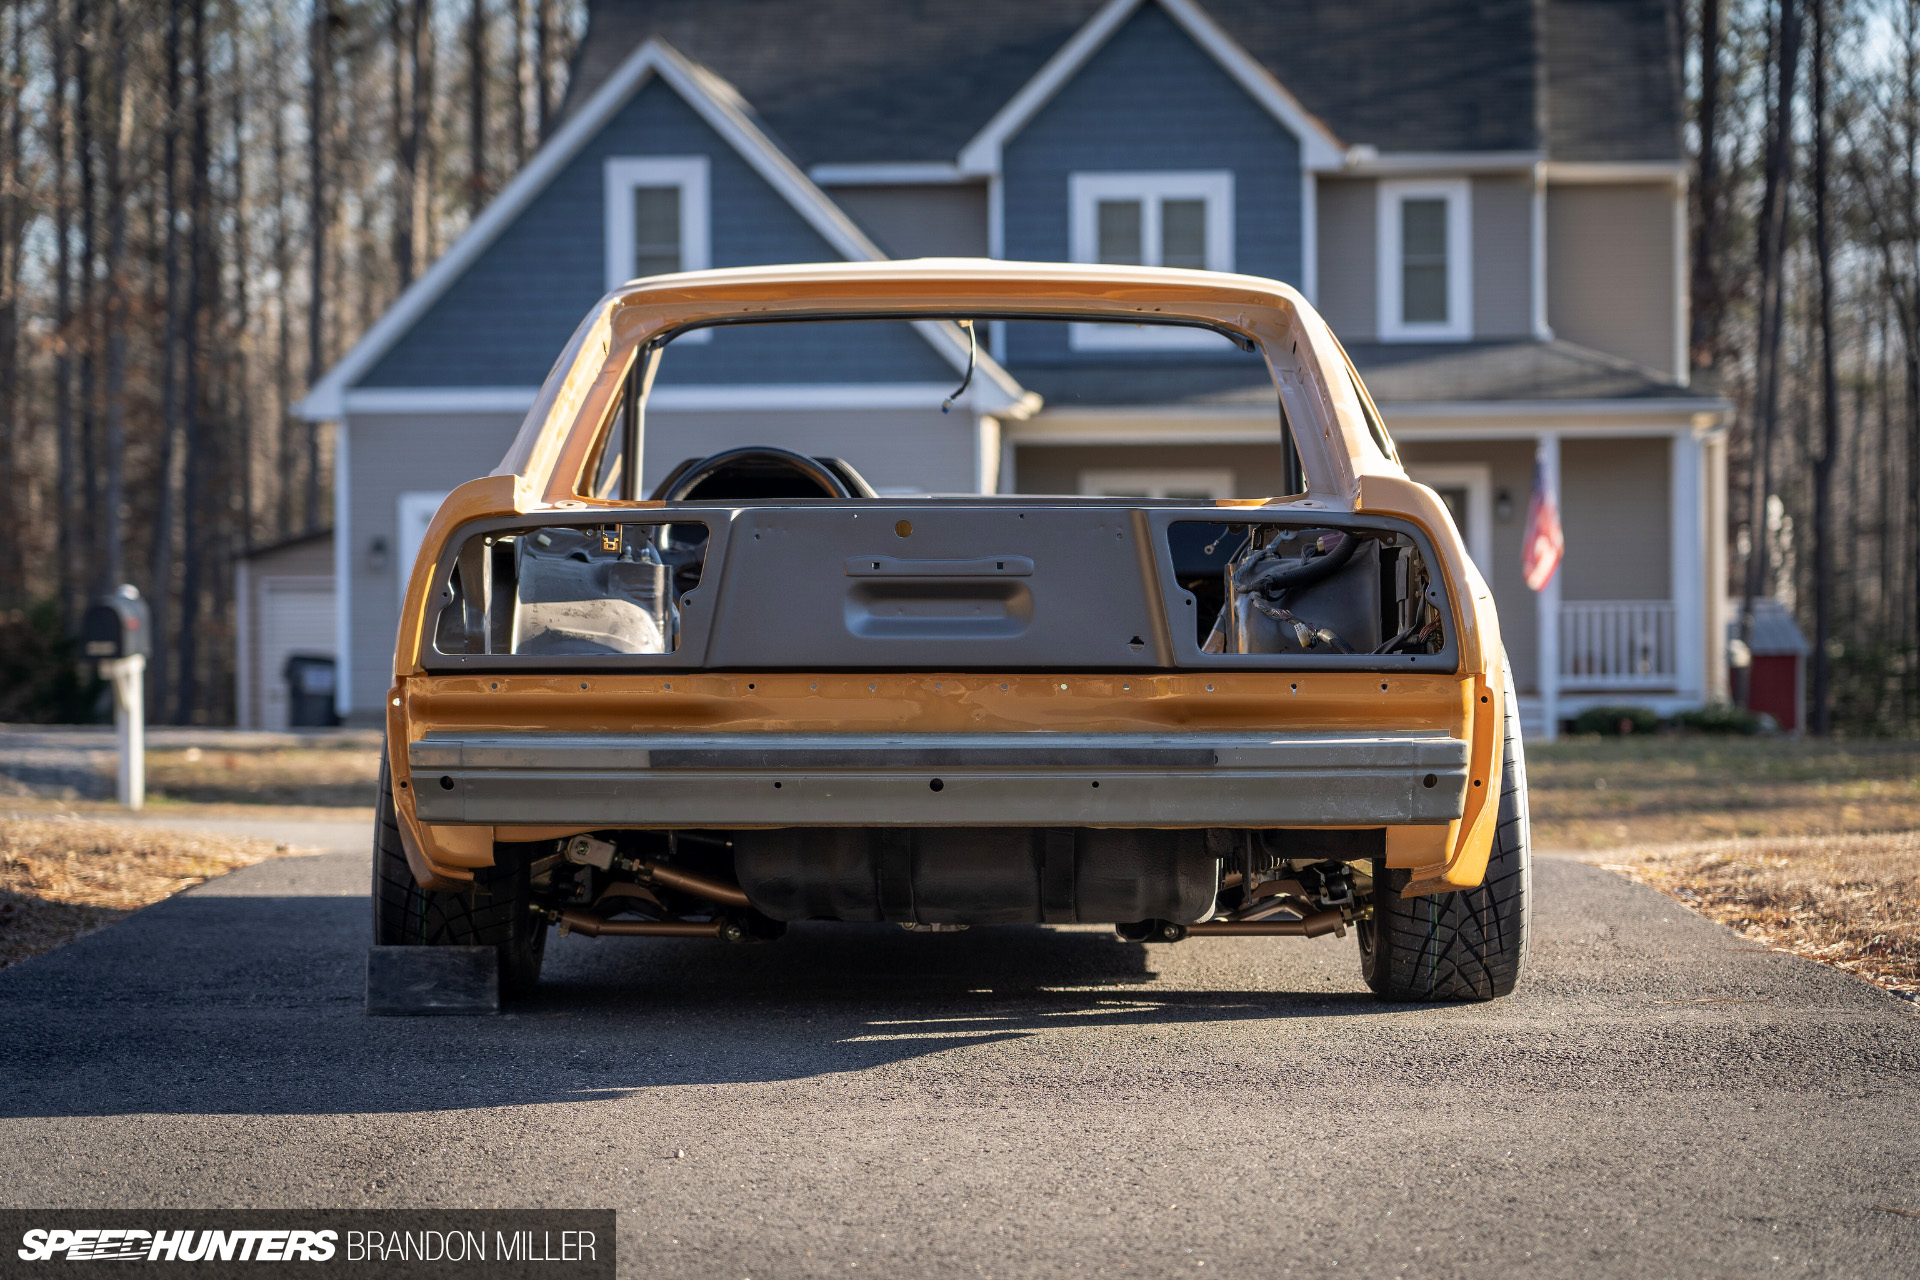 Project Z31 432: Getting Technical | GFMotorSports.net - The Ultimate